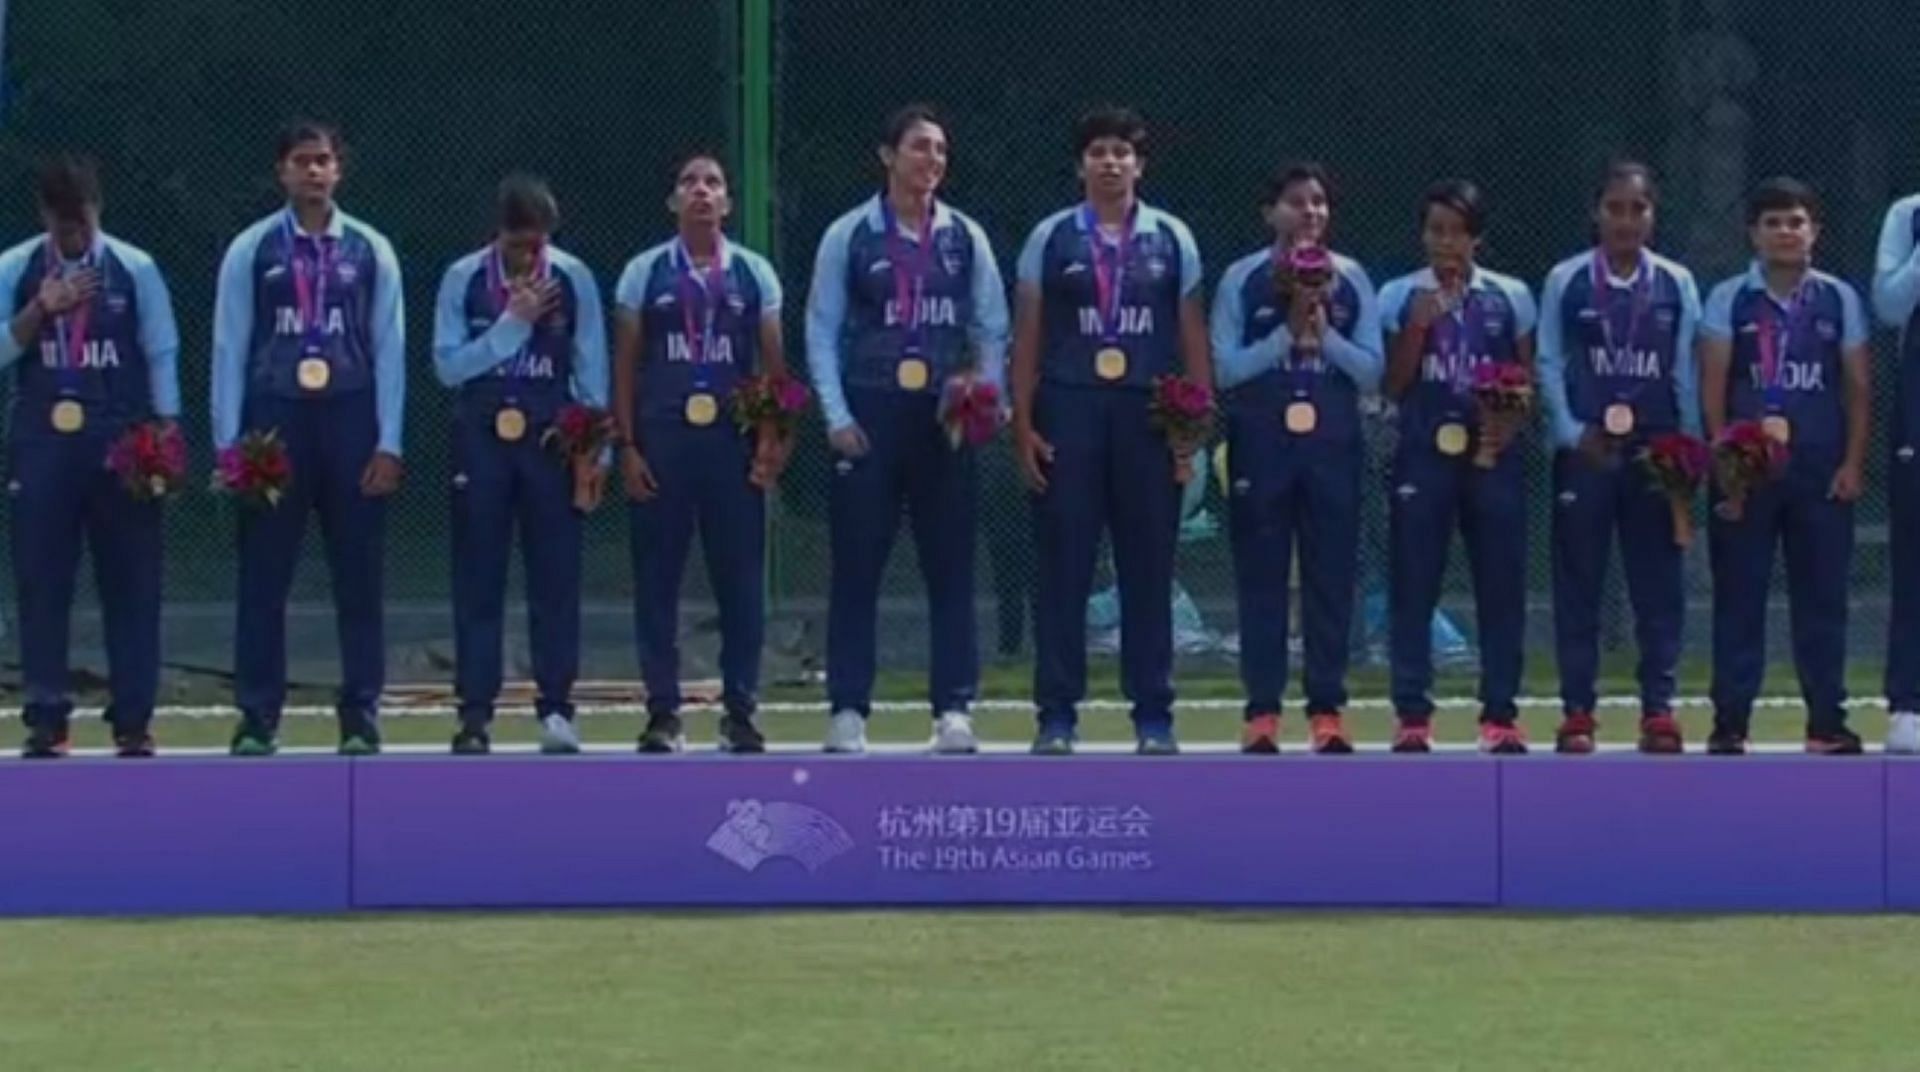 The Indian Women clinched Gold in their maiden Asian Games campaign.